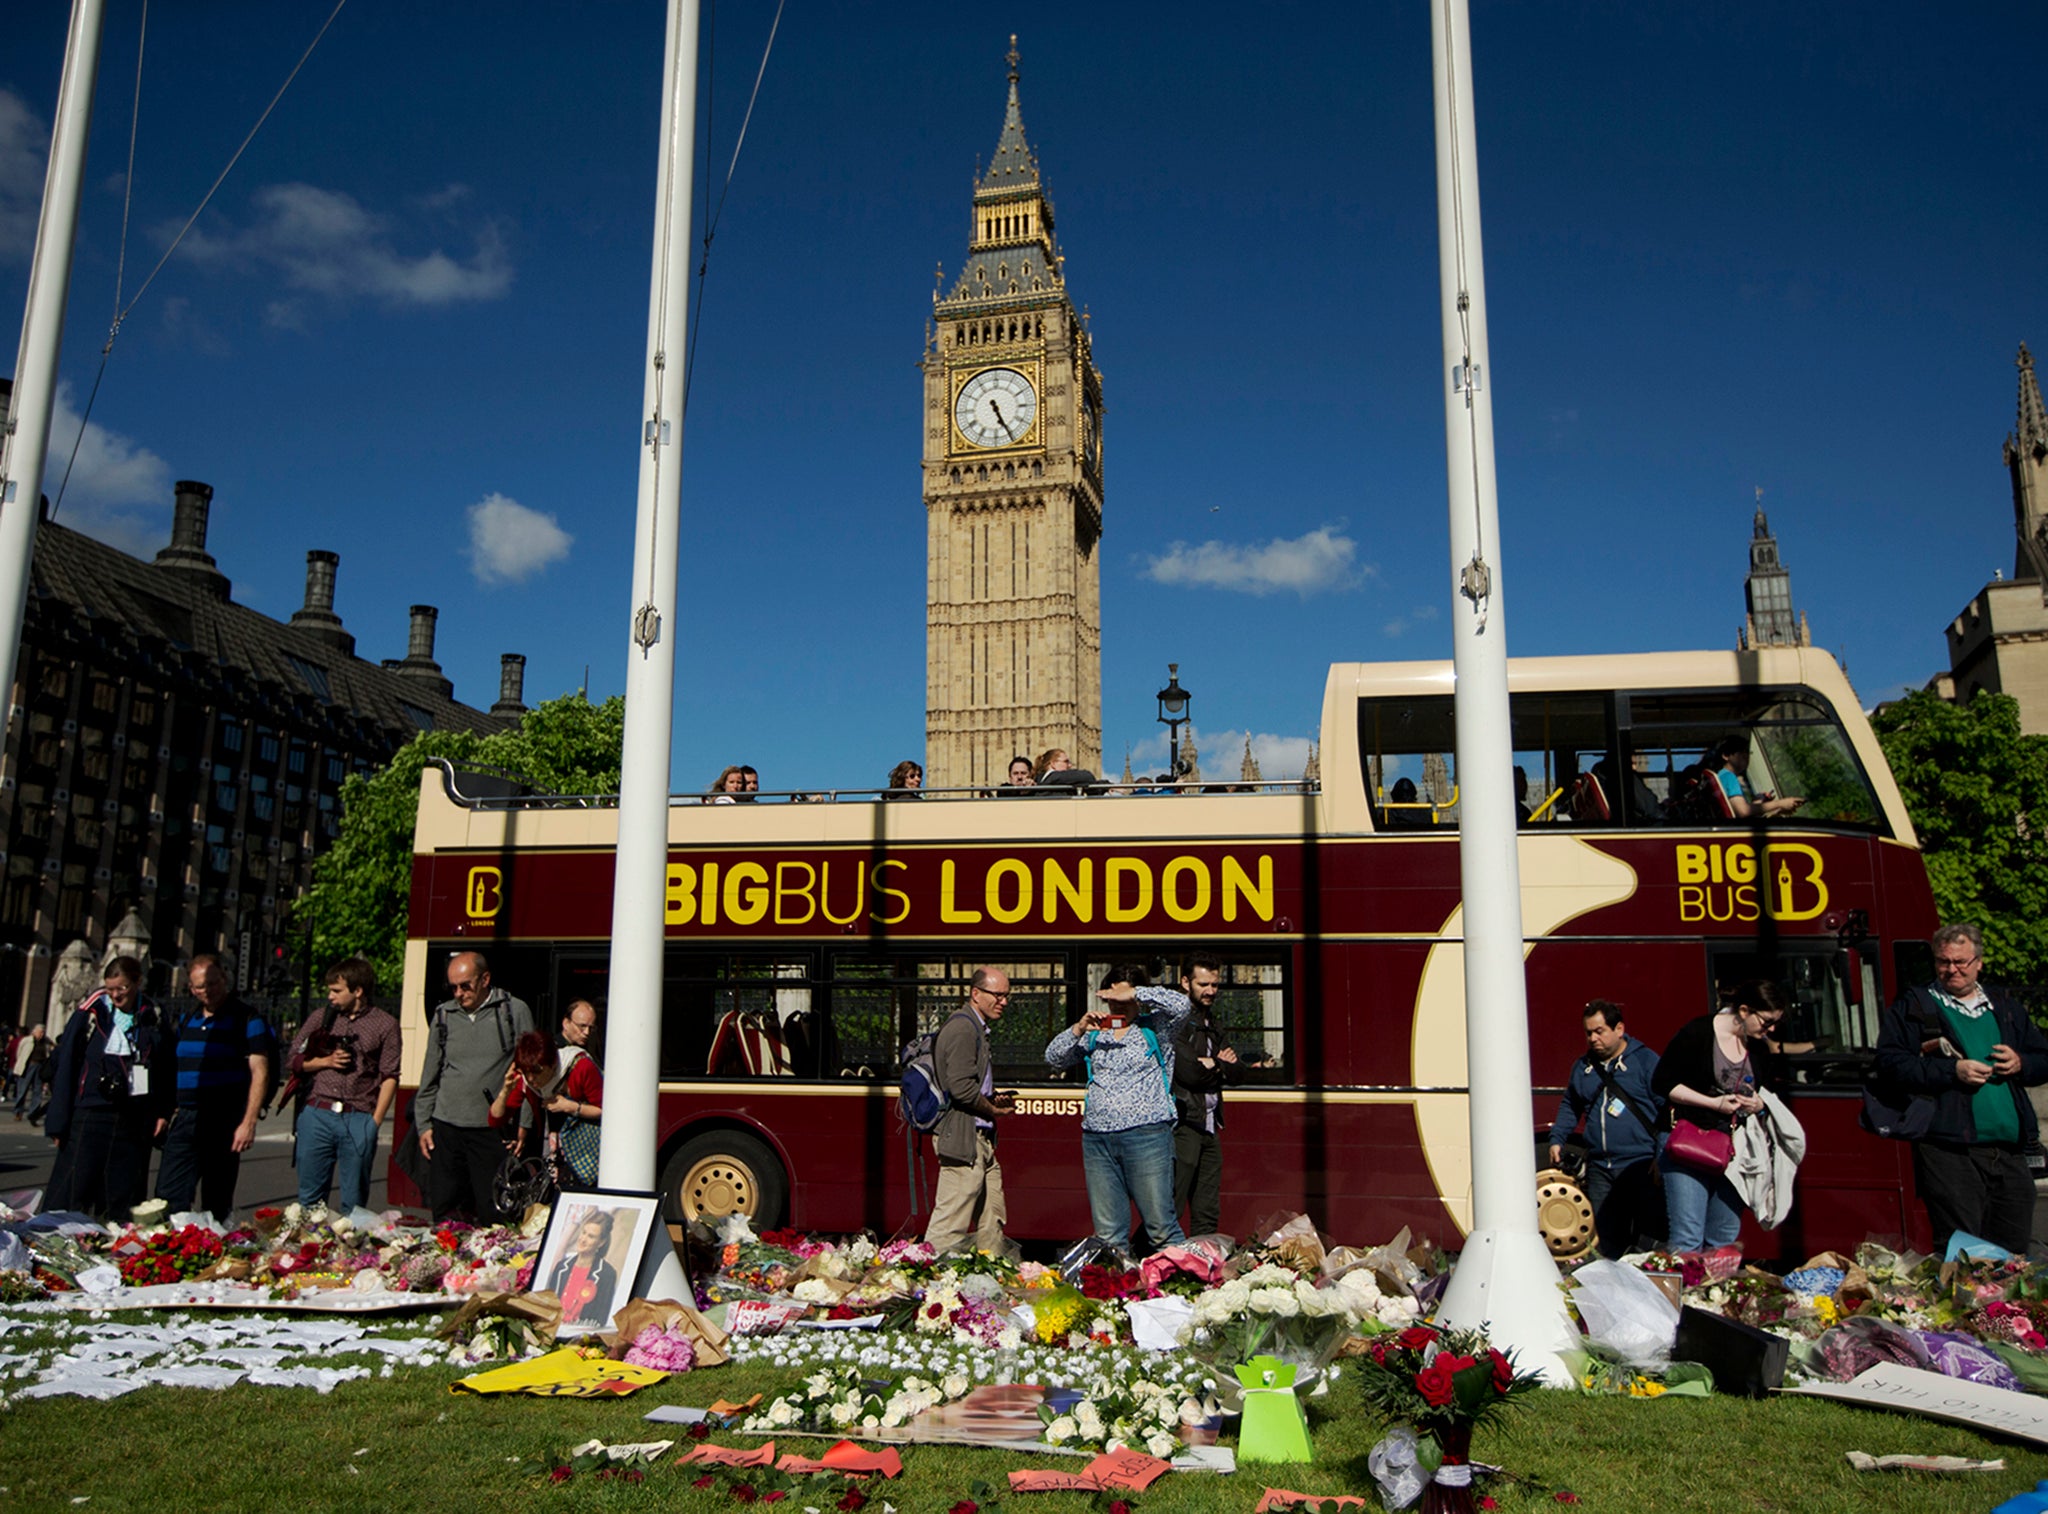 Well-wishers leaving tributes to murdered MP Jo Cox in Parliament Square